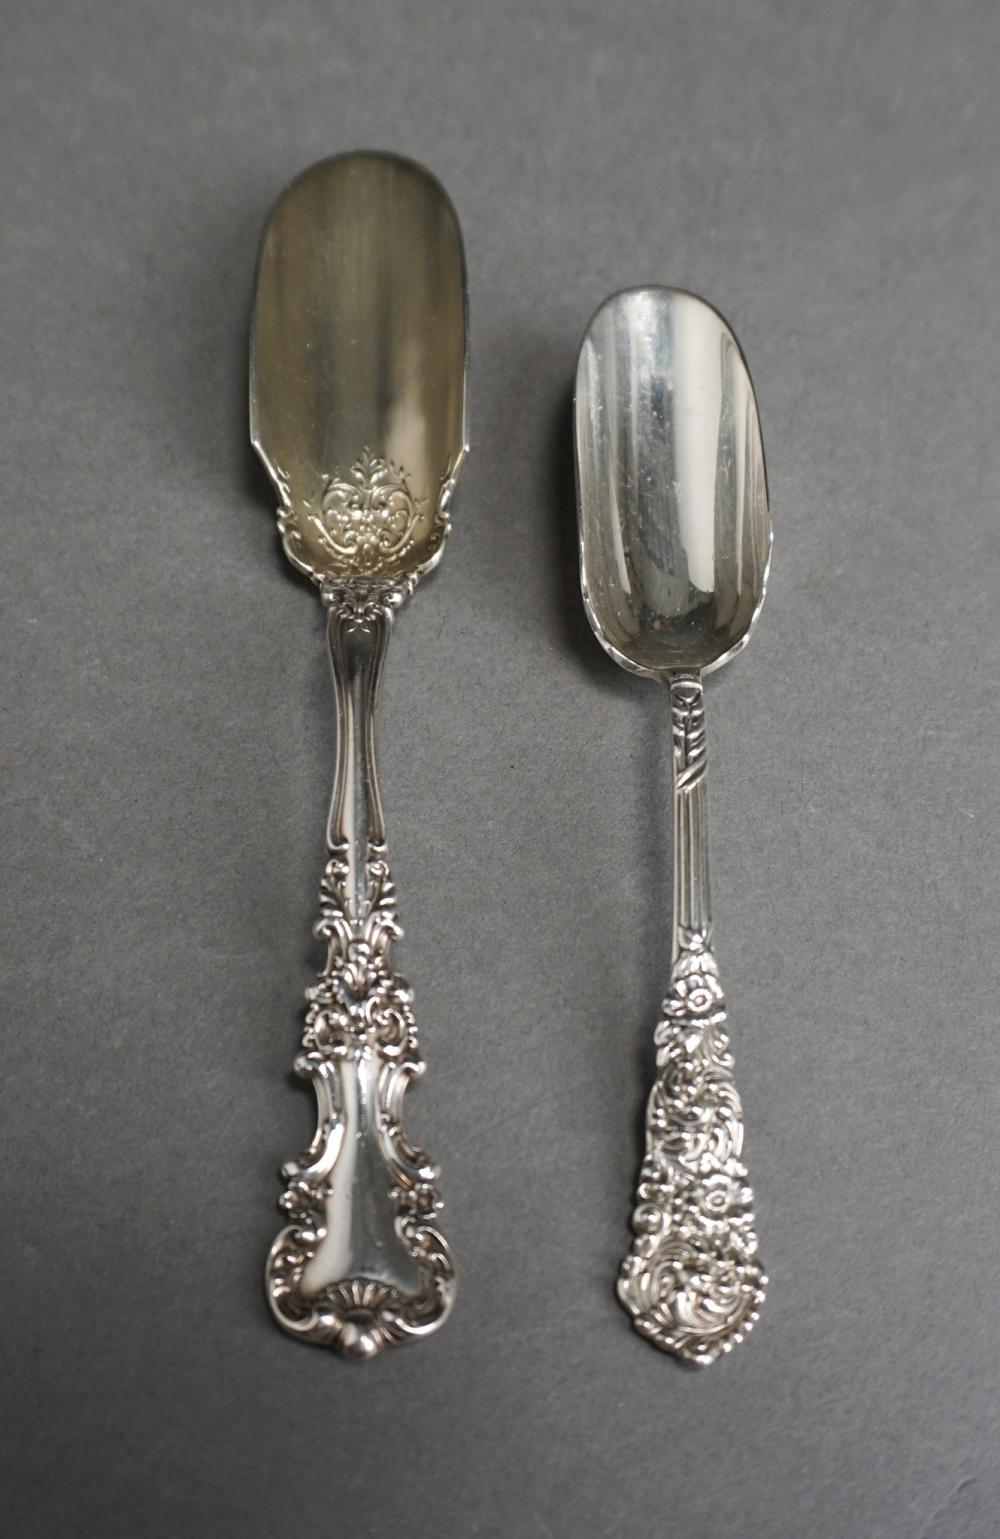 TWO AMERICAN STERLING SILVER CHEESE